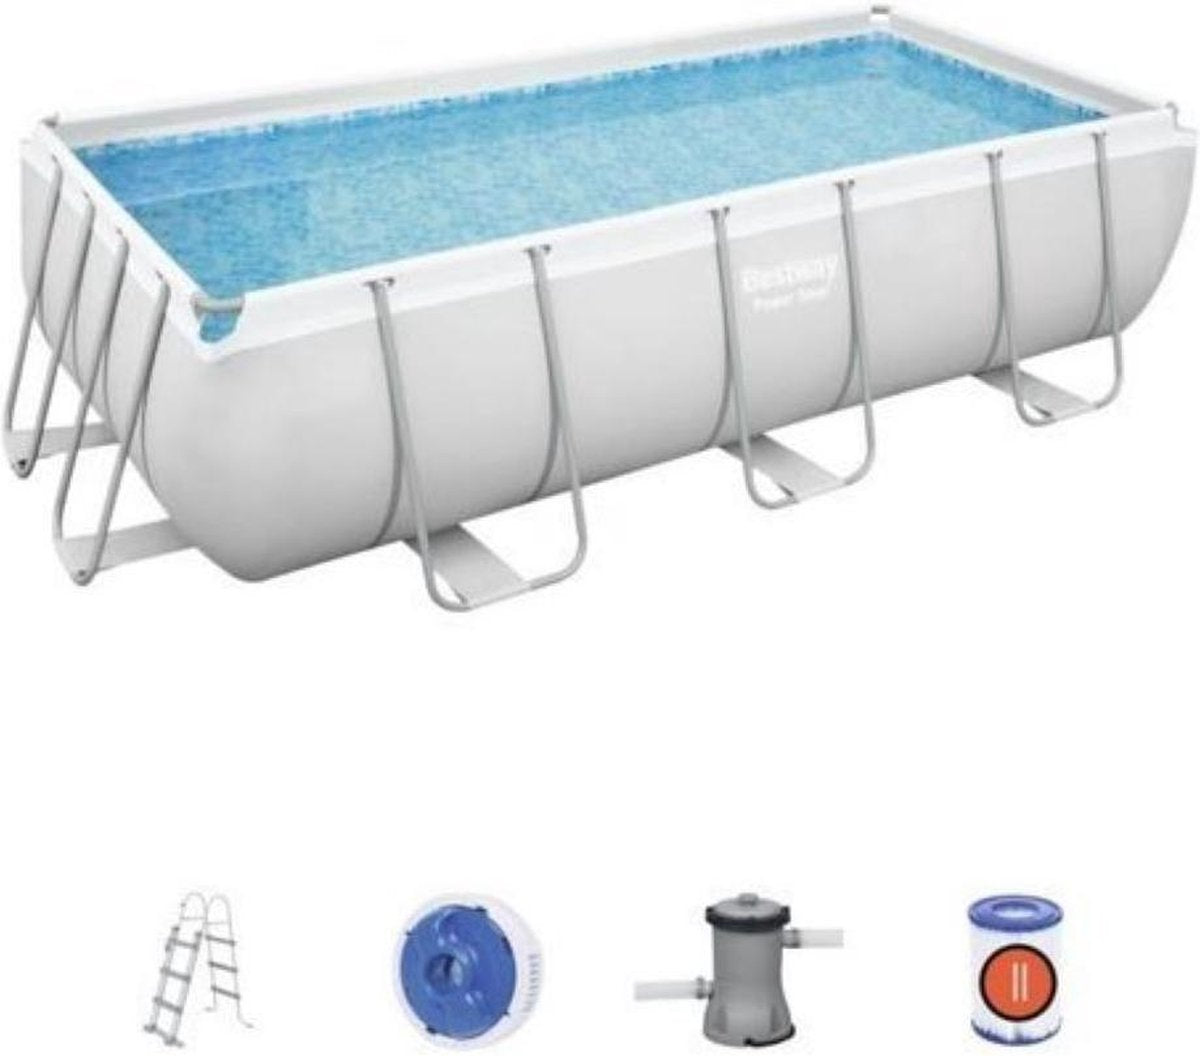 Bestway Powersteel Swimming pool 404x201x100cm including filter pump and stairs